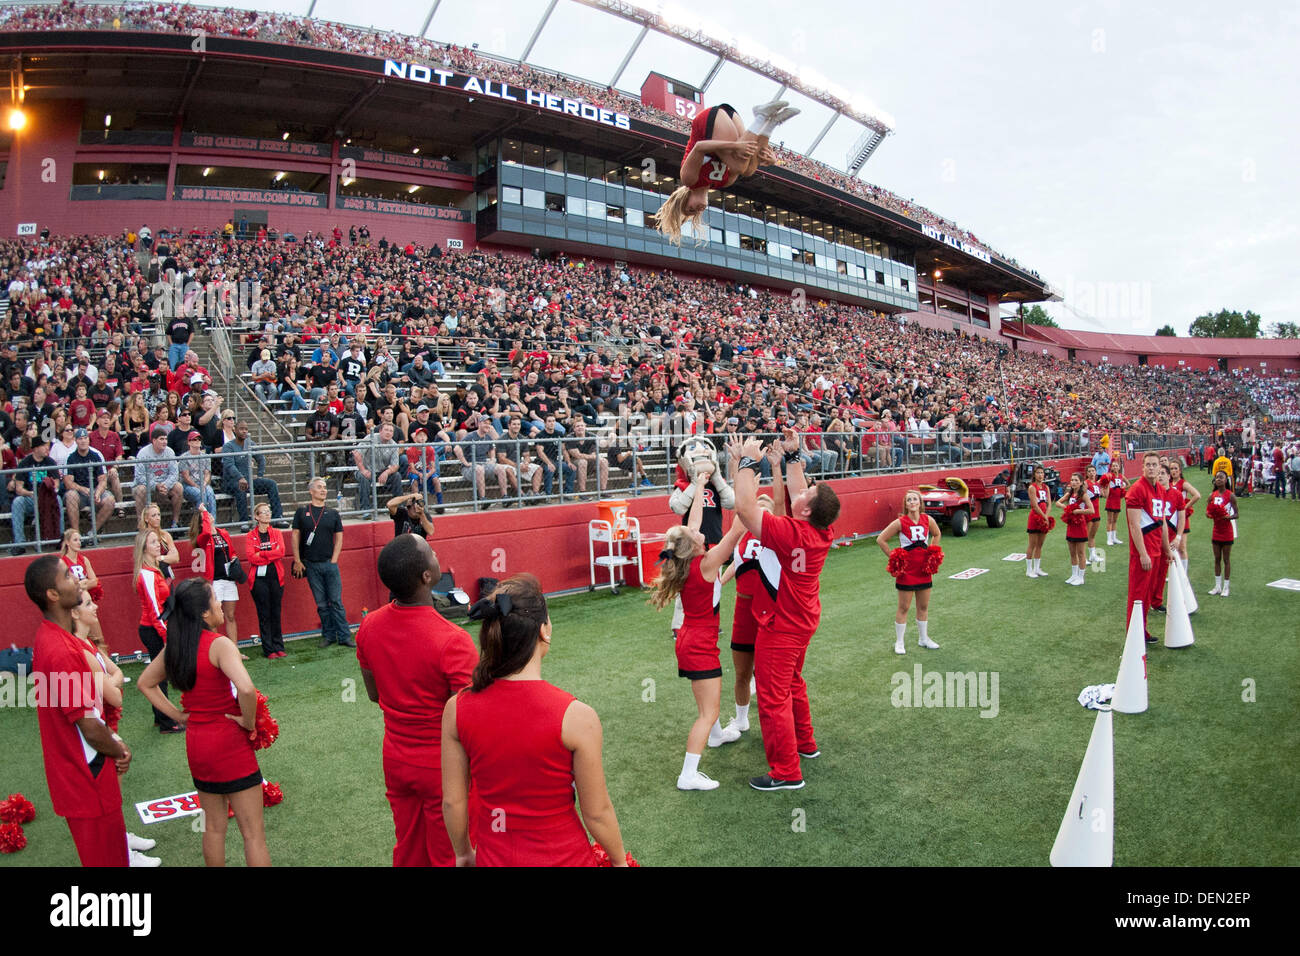 Piscataway, New Jersey, USA. 21st Sep, 2013. September 21, 2013: A Rutgers Scarlet Knights cheerleader is flipped into the air during the game between Arkansas Razorbacks and Rutgers Scarlet Knights at Highpoint Solutions Stadium in Piscataway, NJ. Rutgers Scarlet Knights defeated The Arkansas Razorbacks 28-24. Credit:  csm/Alamy Live News Stock Photo